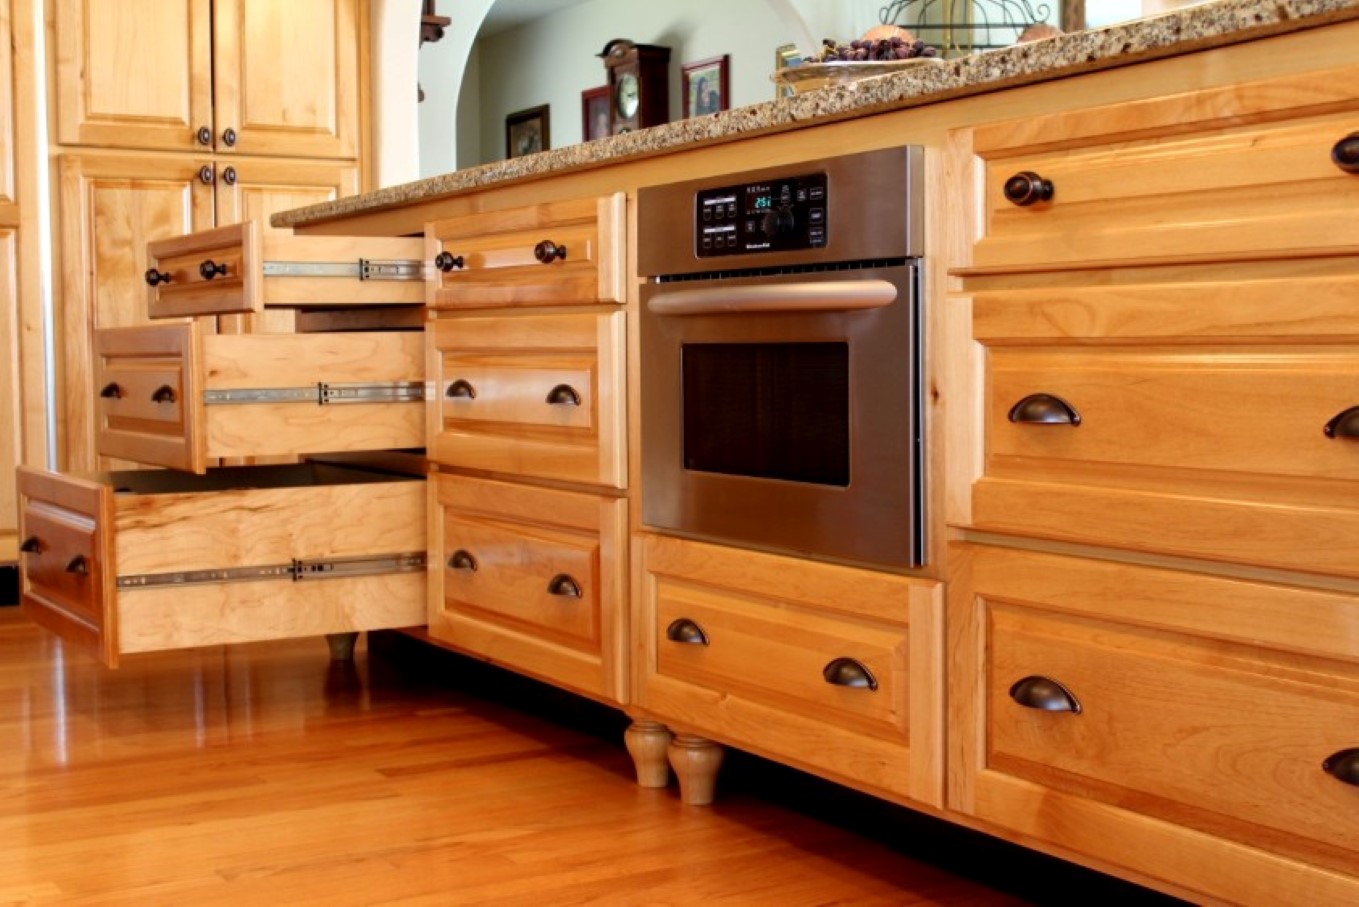 Wooden Cabinets Hardware Fabulous Wooden Cabinets And Black Hardware Idea Plus Under Counter Microwave Feat Beautiful Laminate Floor Design Kitchen  Interesting Information On Under-Counter Microwave 